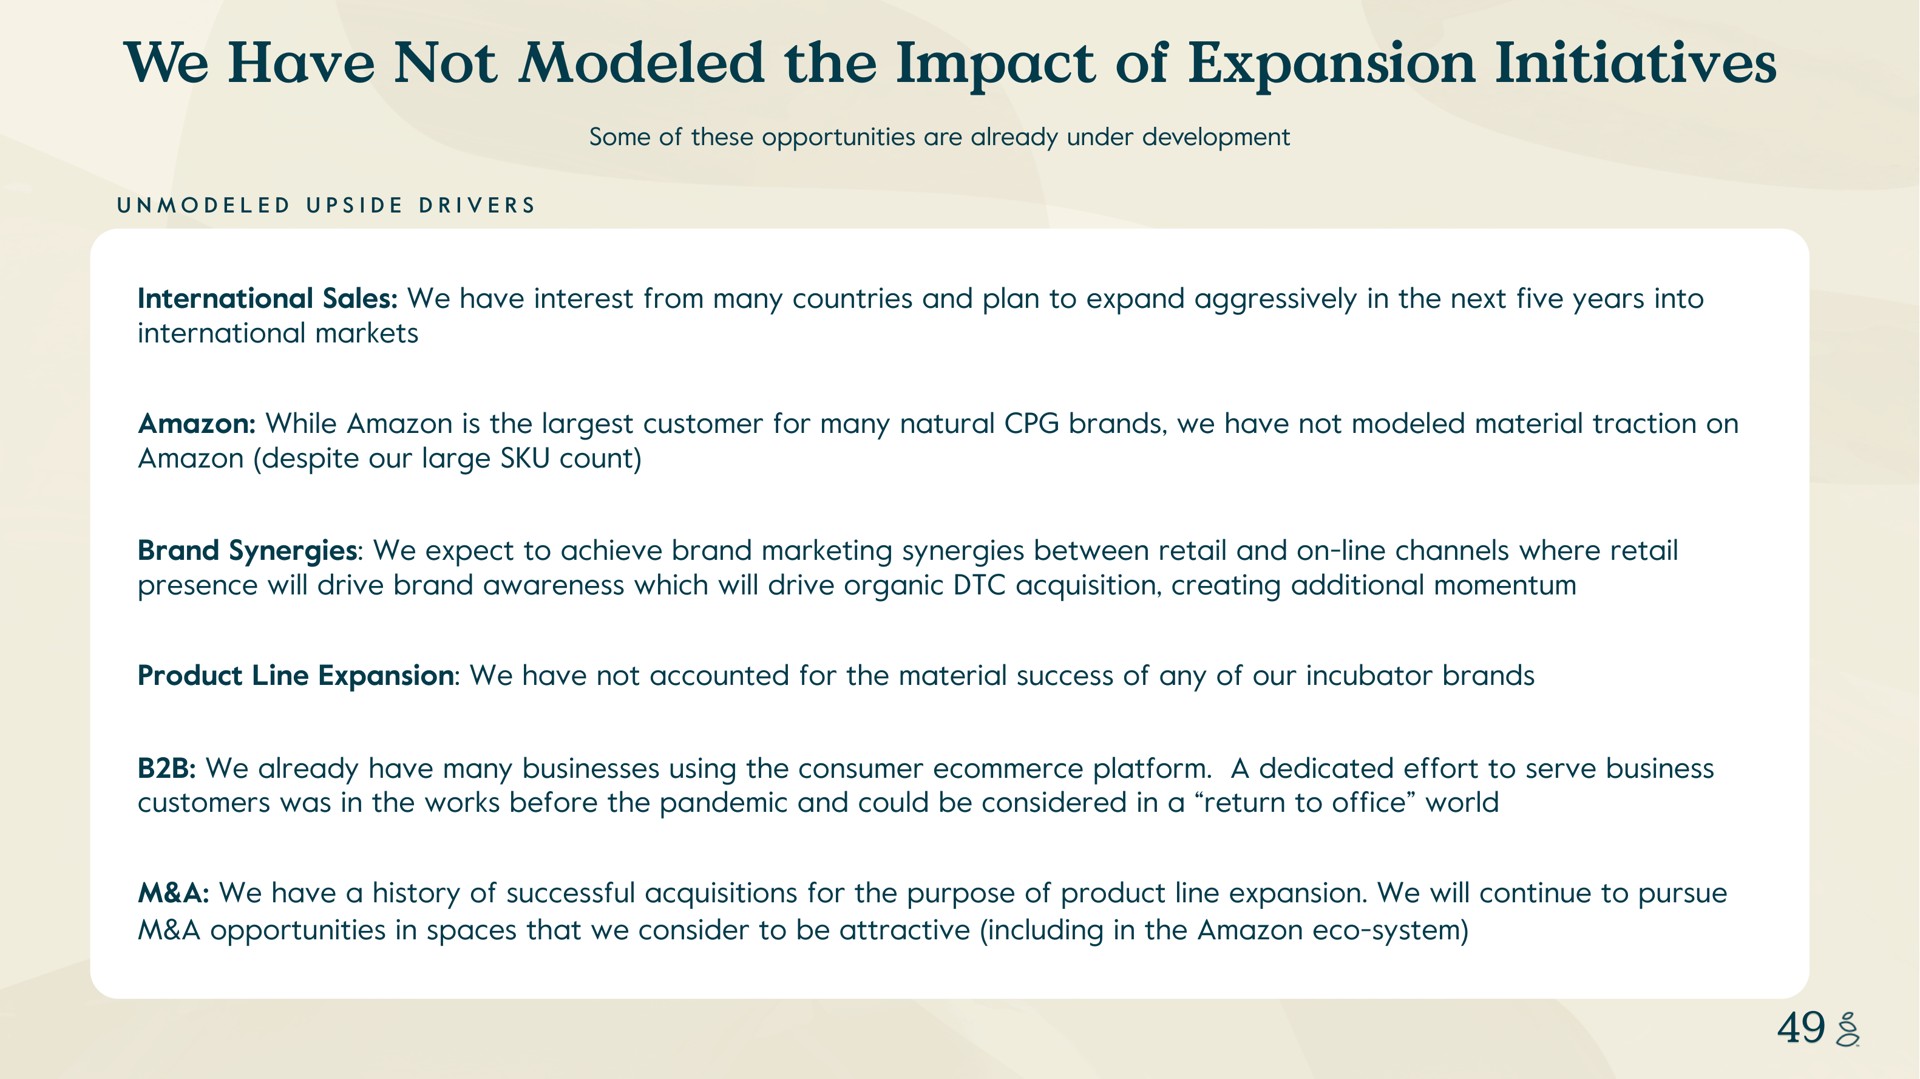 we have not modeled the impact of expansion initiatives unmodeled upside drivers some these opportunities are already under development international sales interest from many countries and plan to expand aggressively in next five years into international markets while is customer for many natural brands material traction on despite our large count brand synergies expect to achieve brand marketing synergies between retail and on line channels where retail presence will drive brand awareness which will drive organic acquisition creating additional momentum product line accounted for material success any our incubator brands already many businesses using consumer platform a dedicated effort to serve business customers was in works before pandemic and could be considered in a return to office world a a history successful acquisitions for purpose product line will continue to pursue a opportunities in spaces that consider to be attractive including in system | Grove